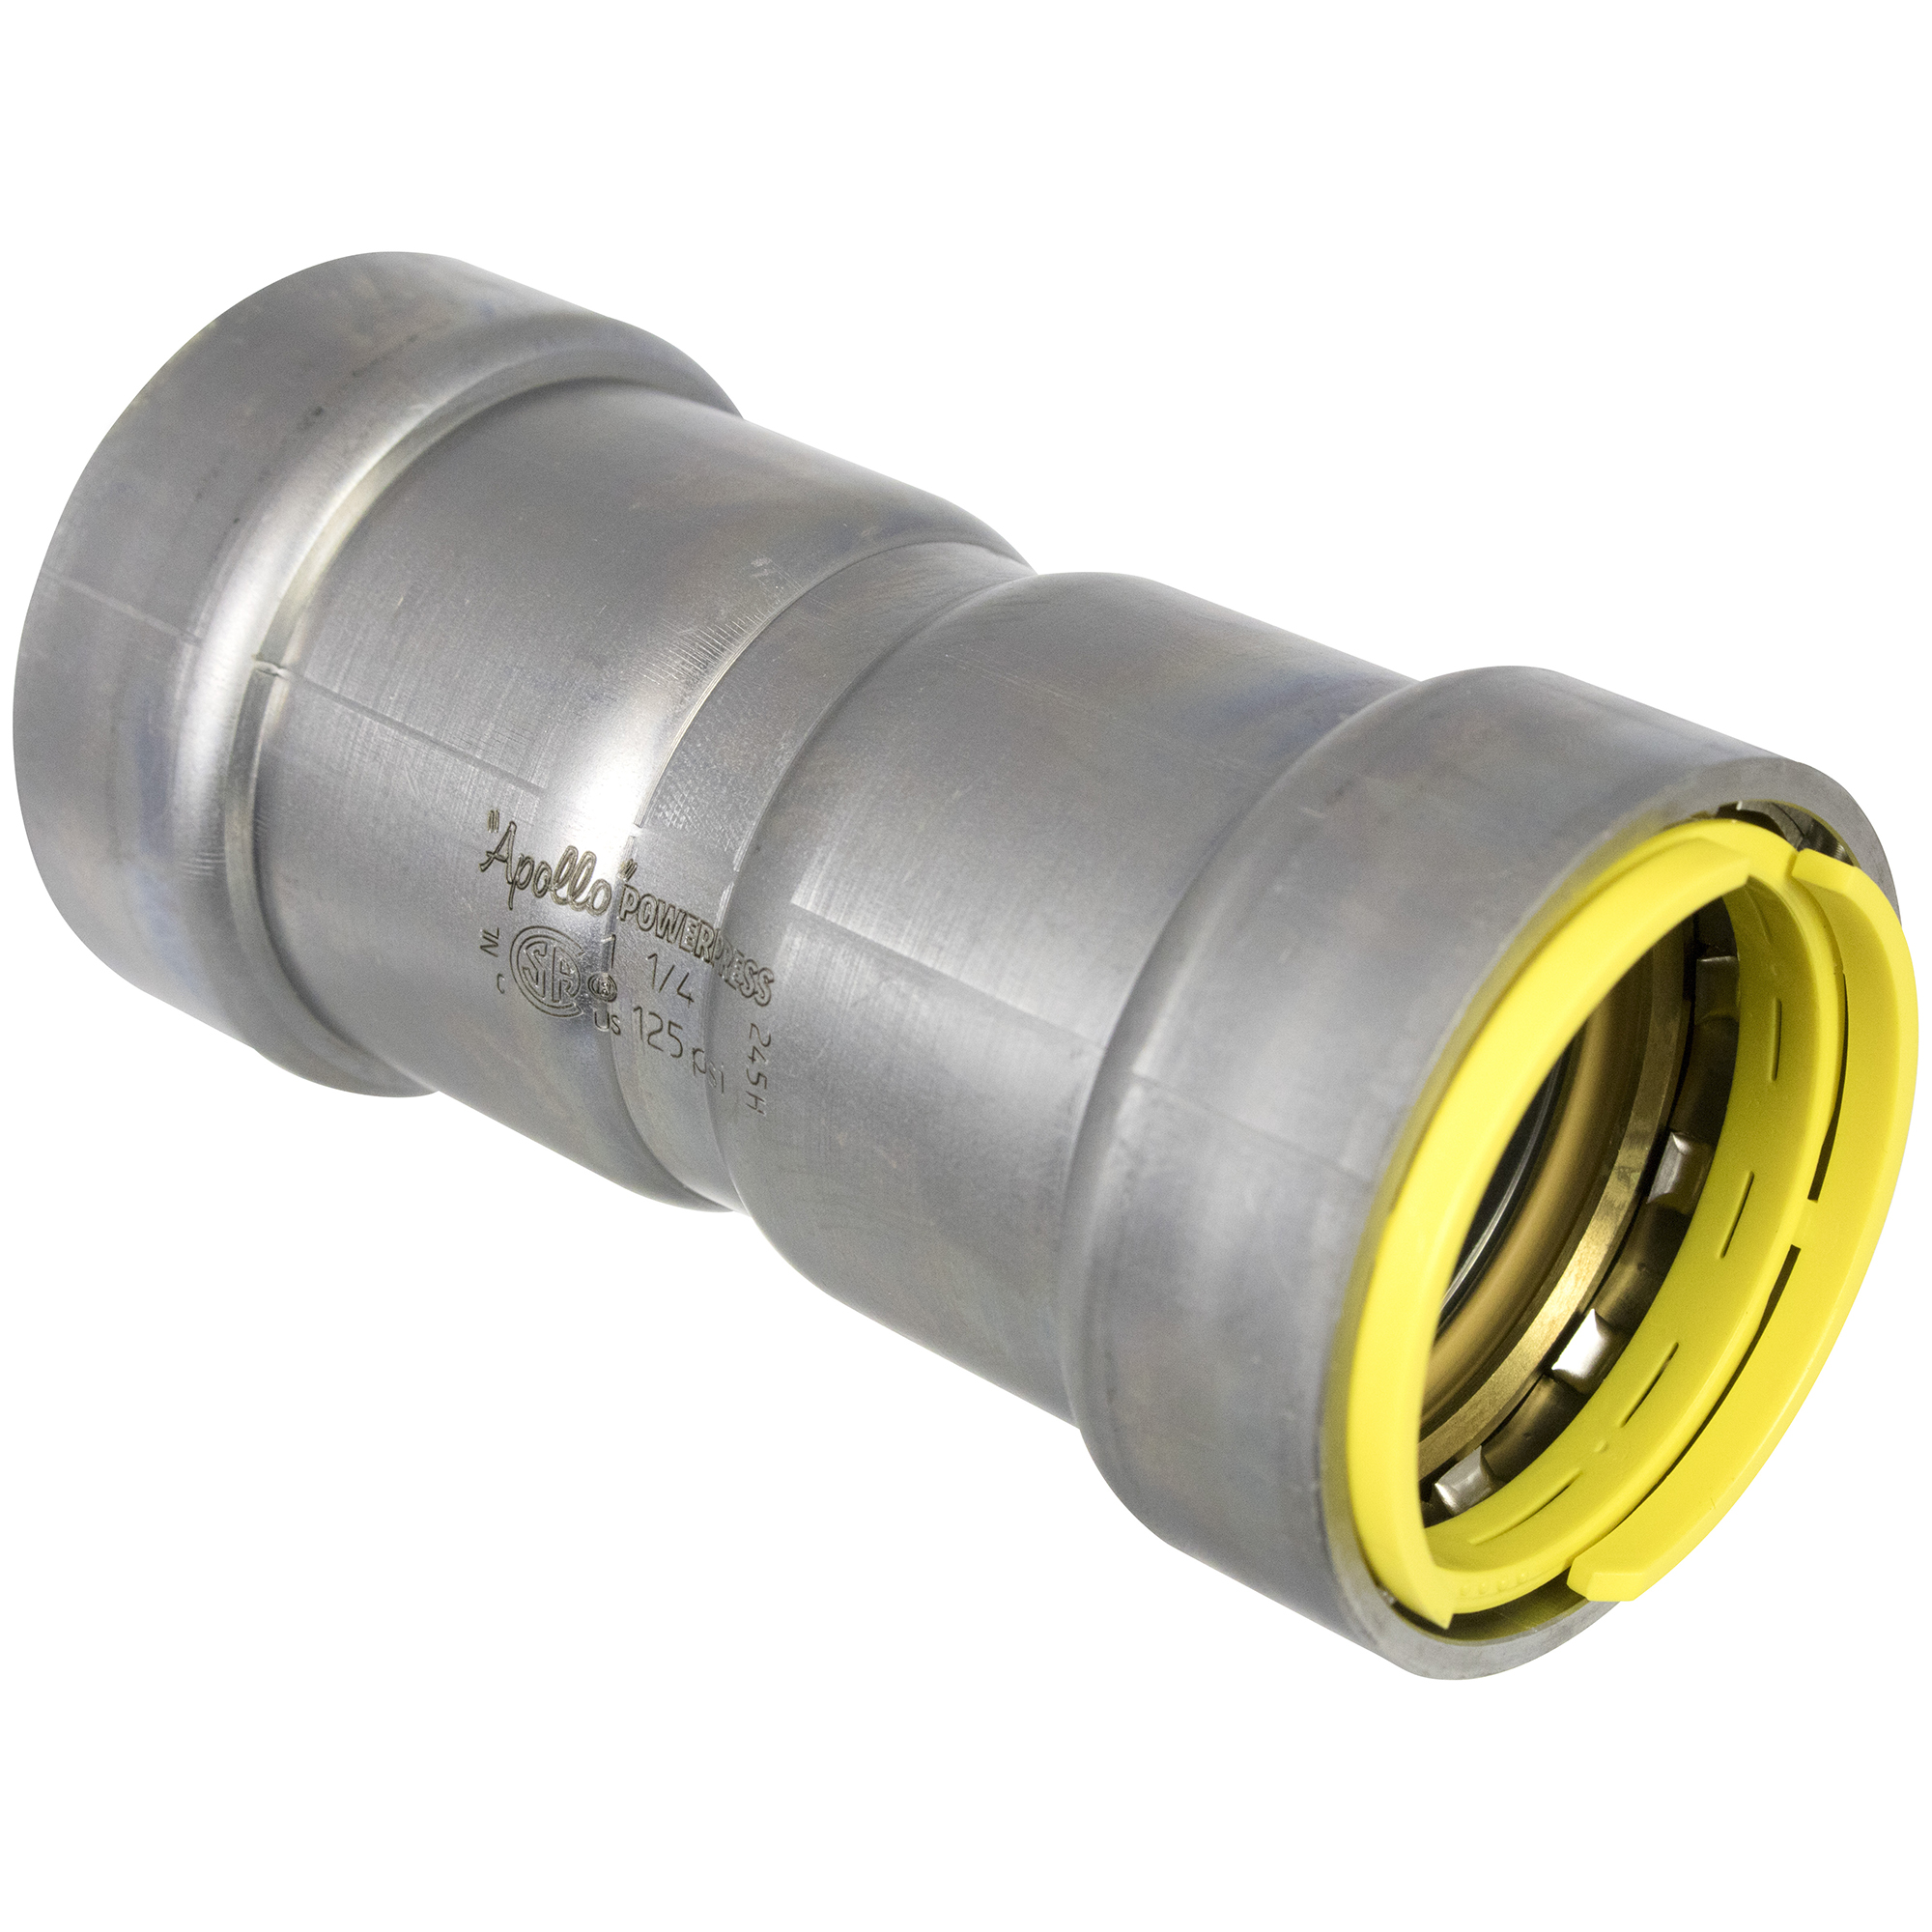 Apollo® PowerPress PWR7481309 400G Coupling With Stop, 3/4 in, Gas